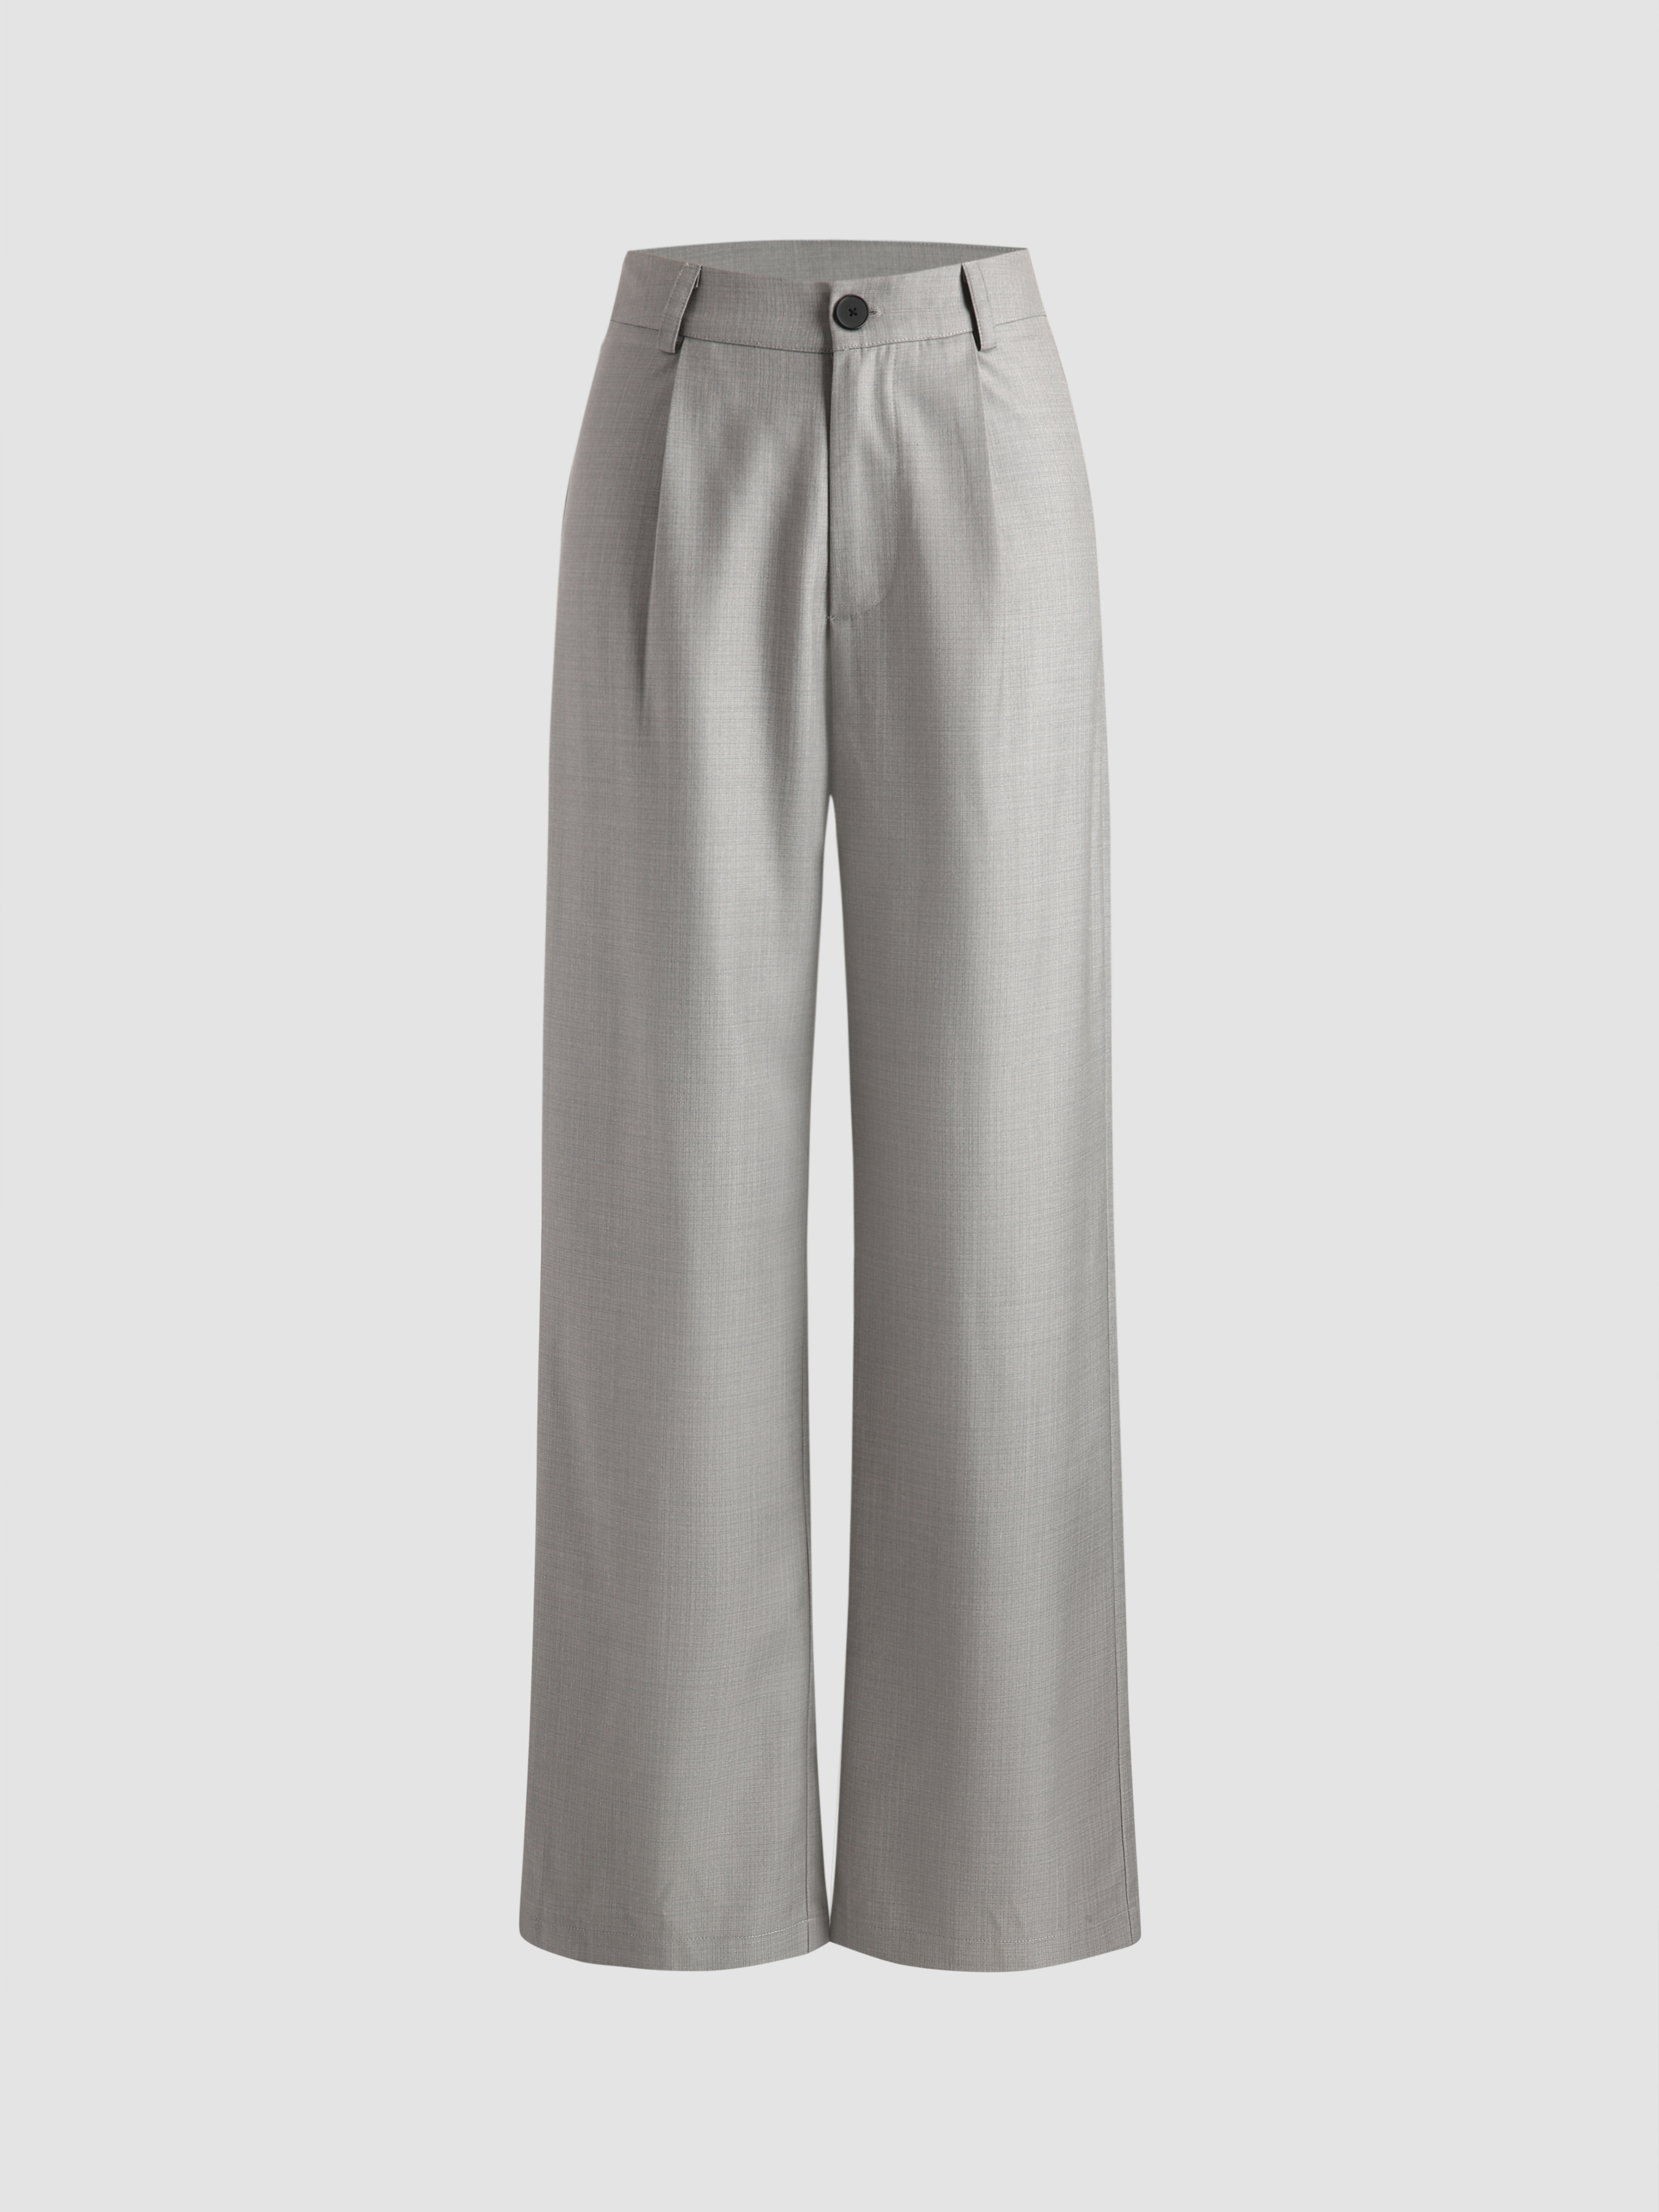 Solid Grey Wide Leg Trousers